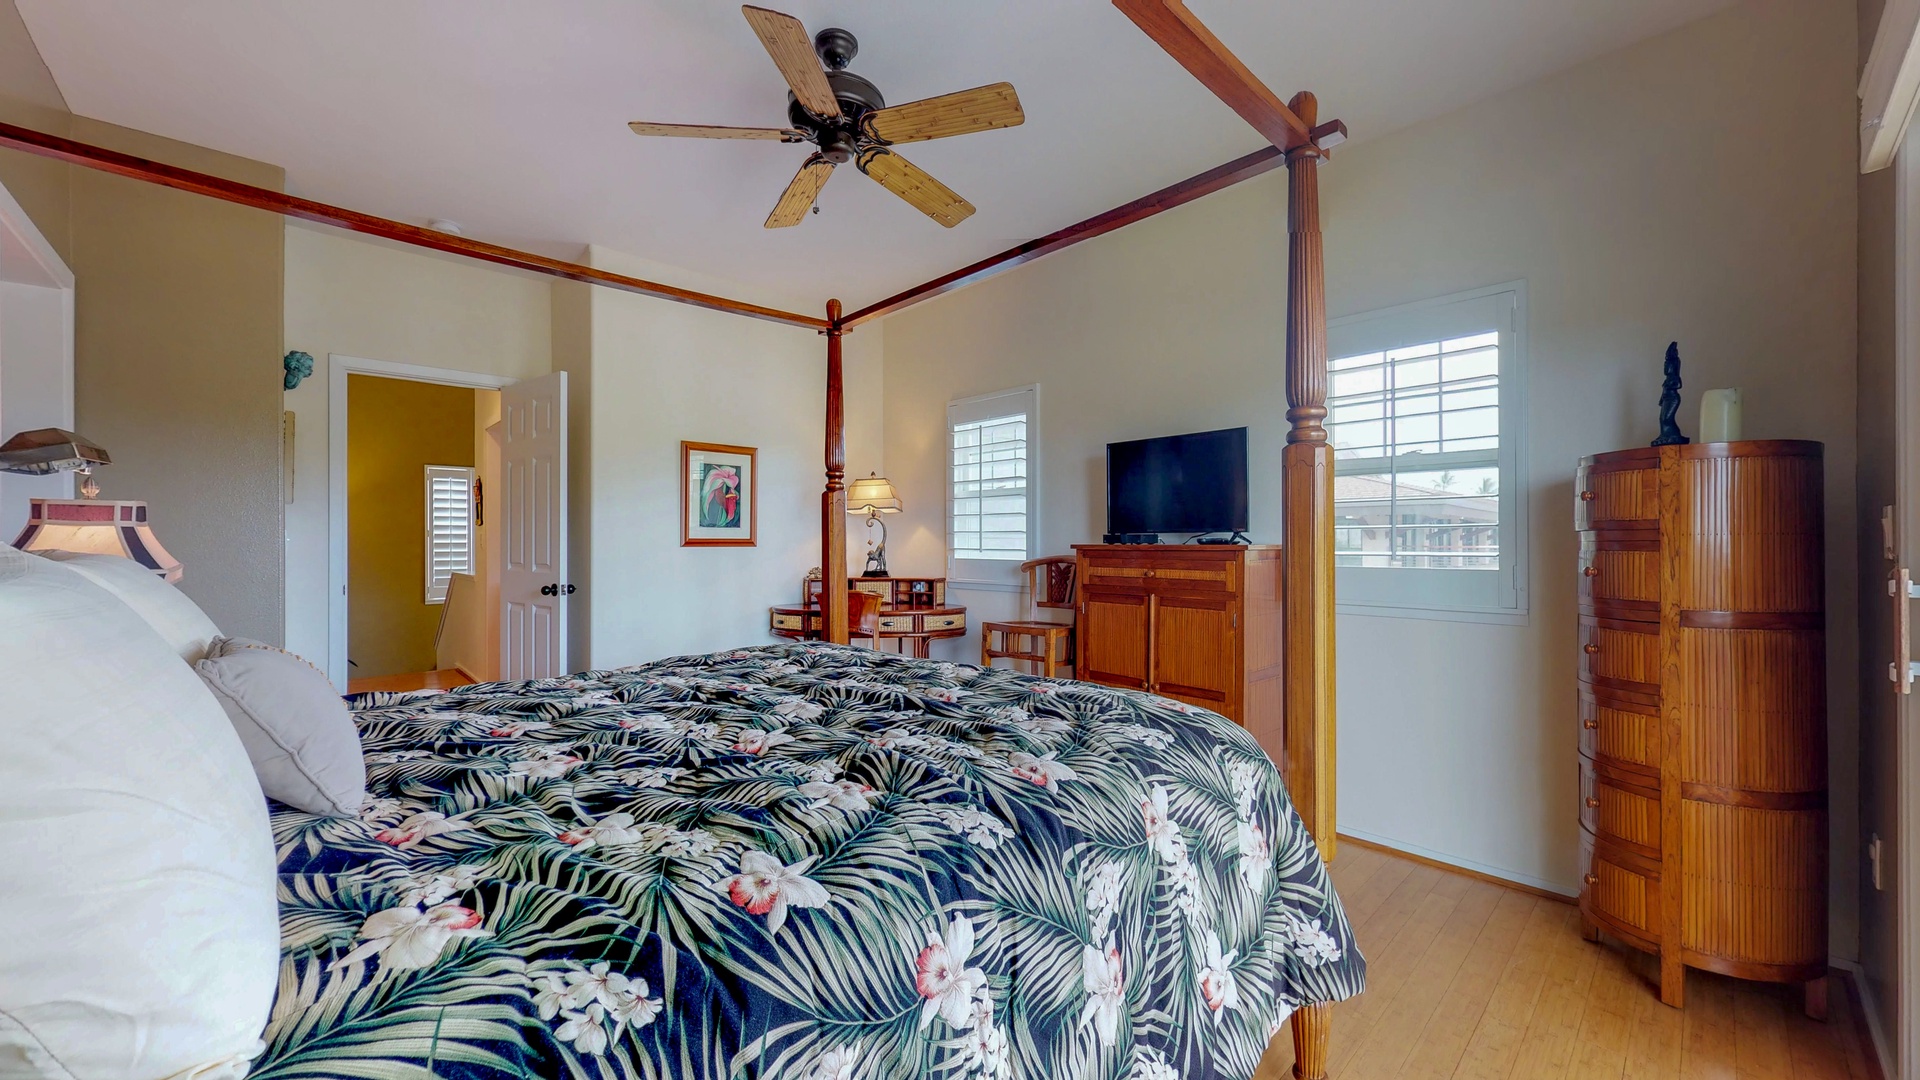 Kapolei Vacation Rentals, Coconut Plantation 1080-1 - The upstairs primary guest bedroom features a TV, dresser an ceiling fan.